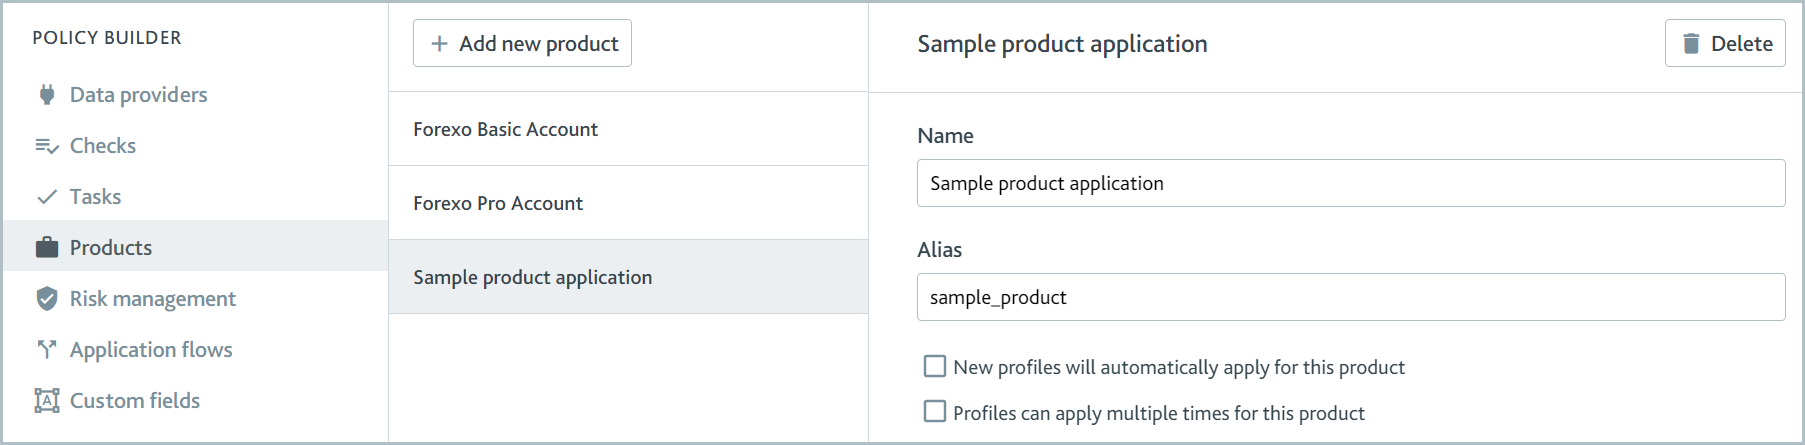 Products page of the Policy Builder with a Sample product application selected.